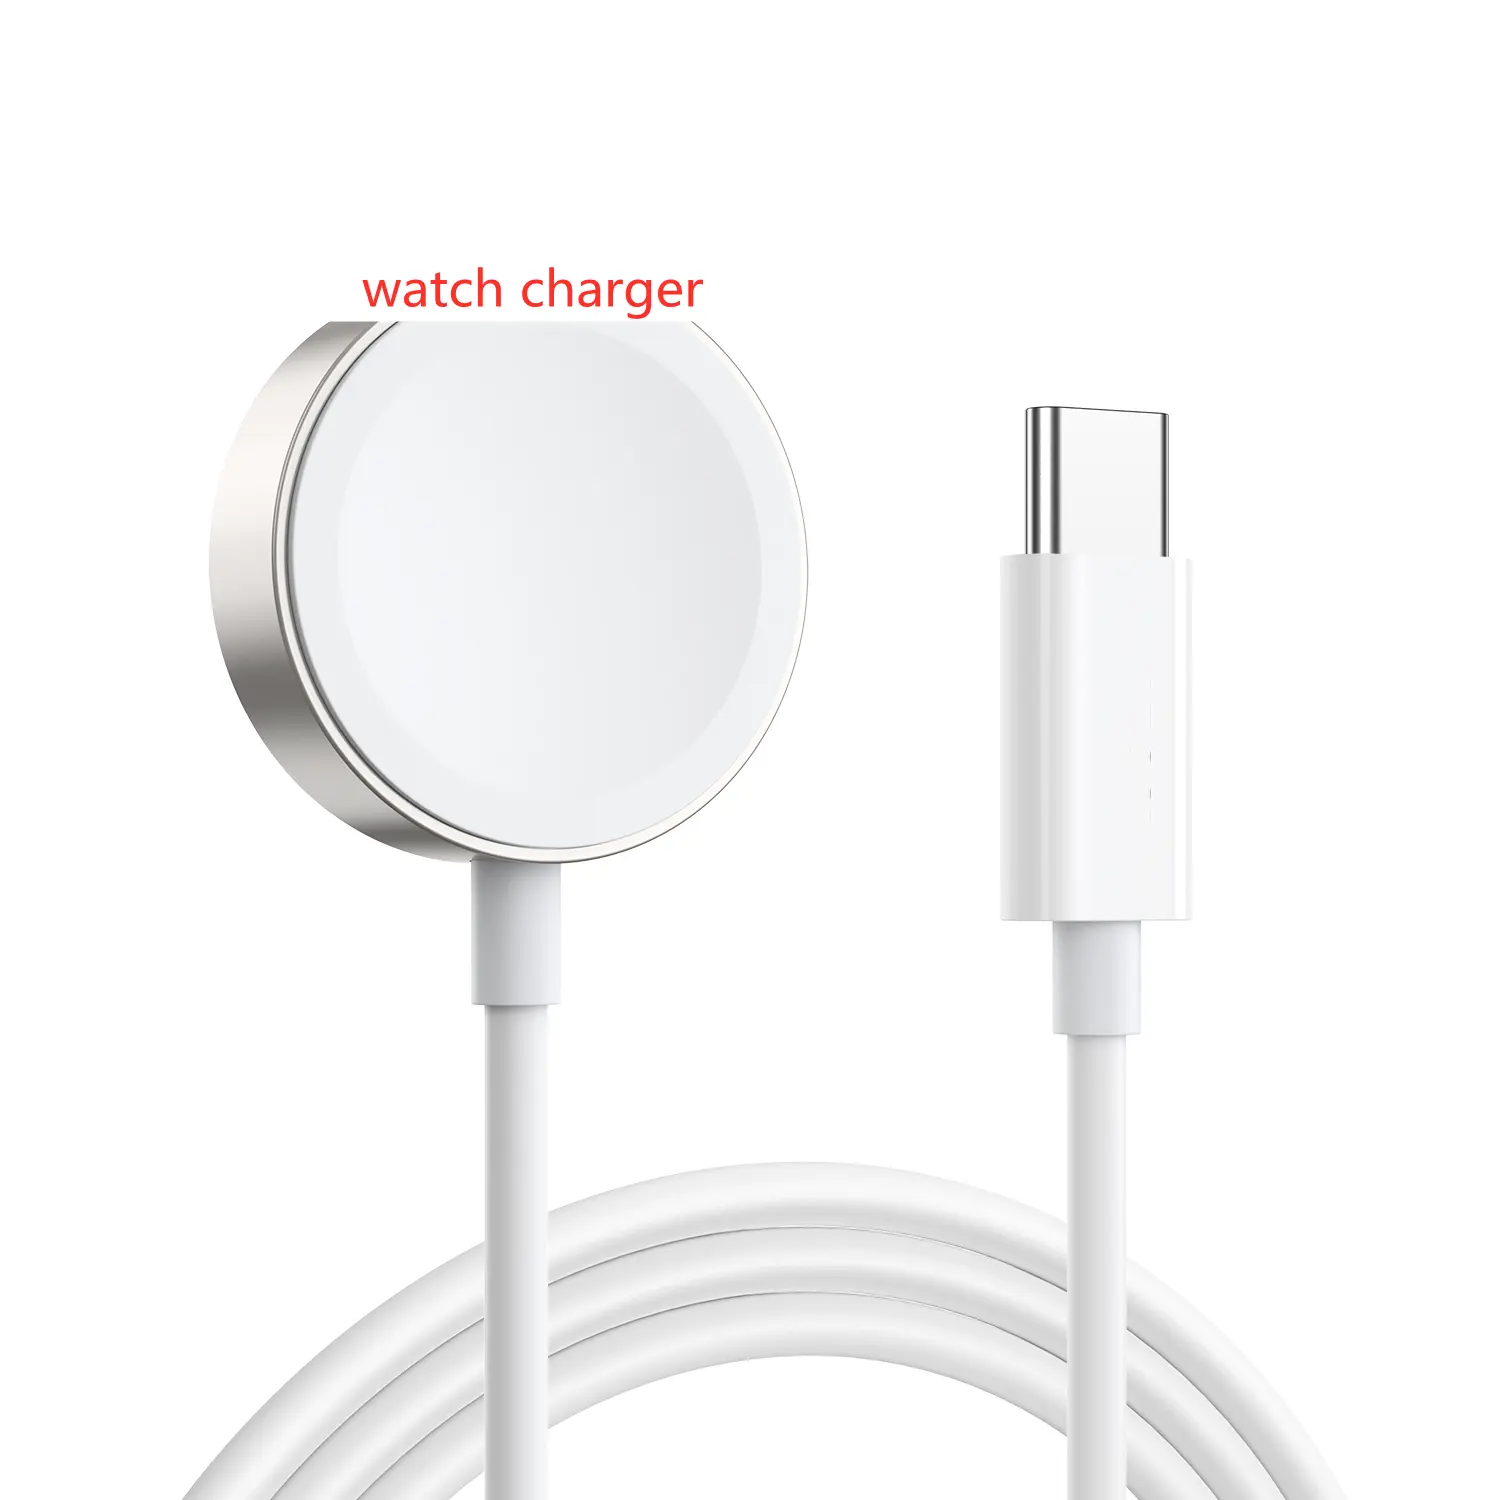 New Type C Magnetic Wireless Charger for Apple Watch Series 7 6 5 4 3 2 SE Applewatch USB C Quick Charging Cord Dock Cable